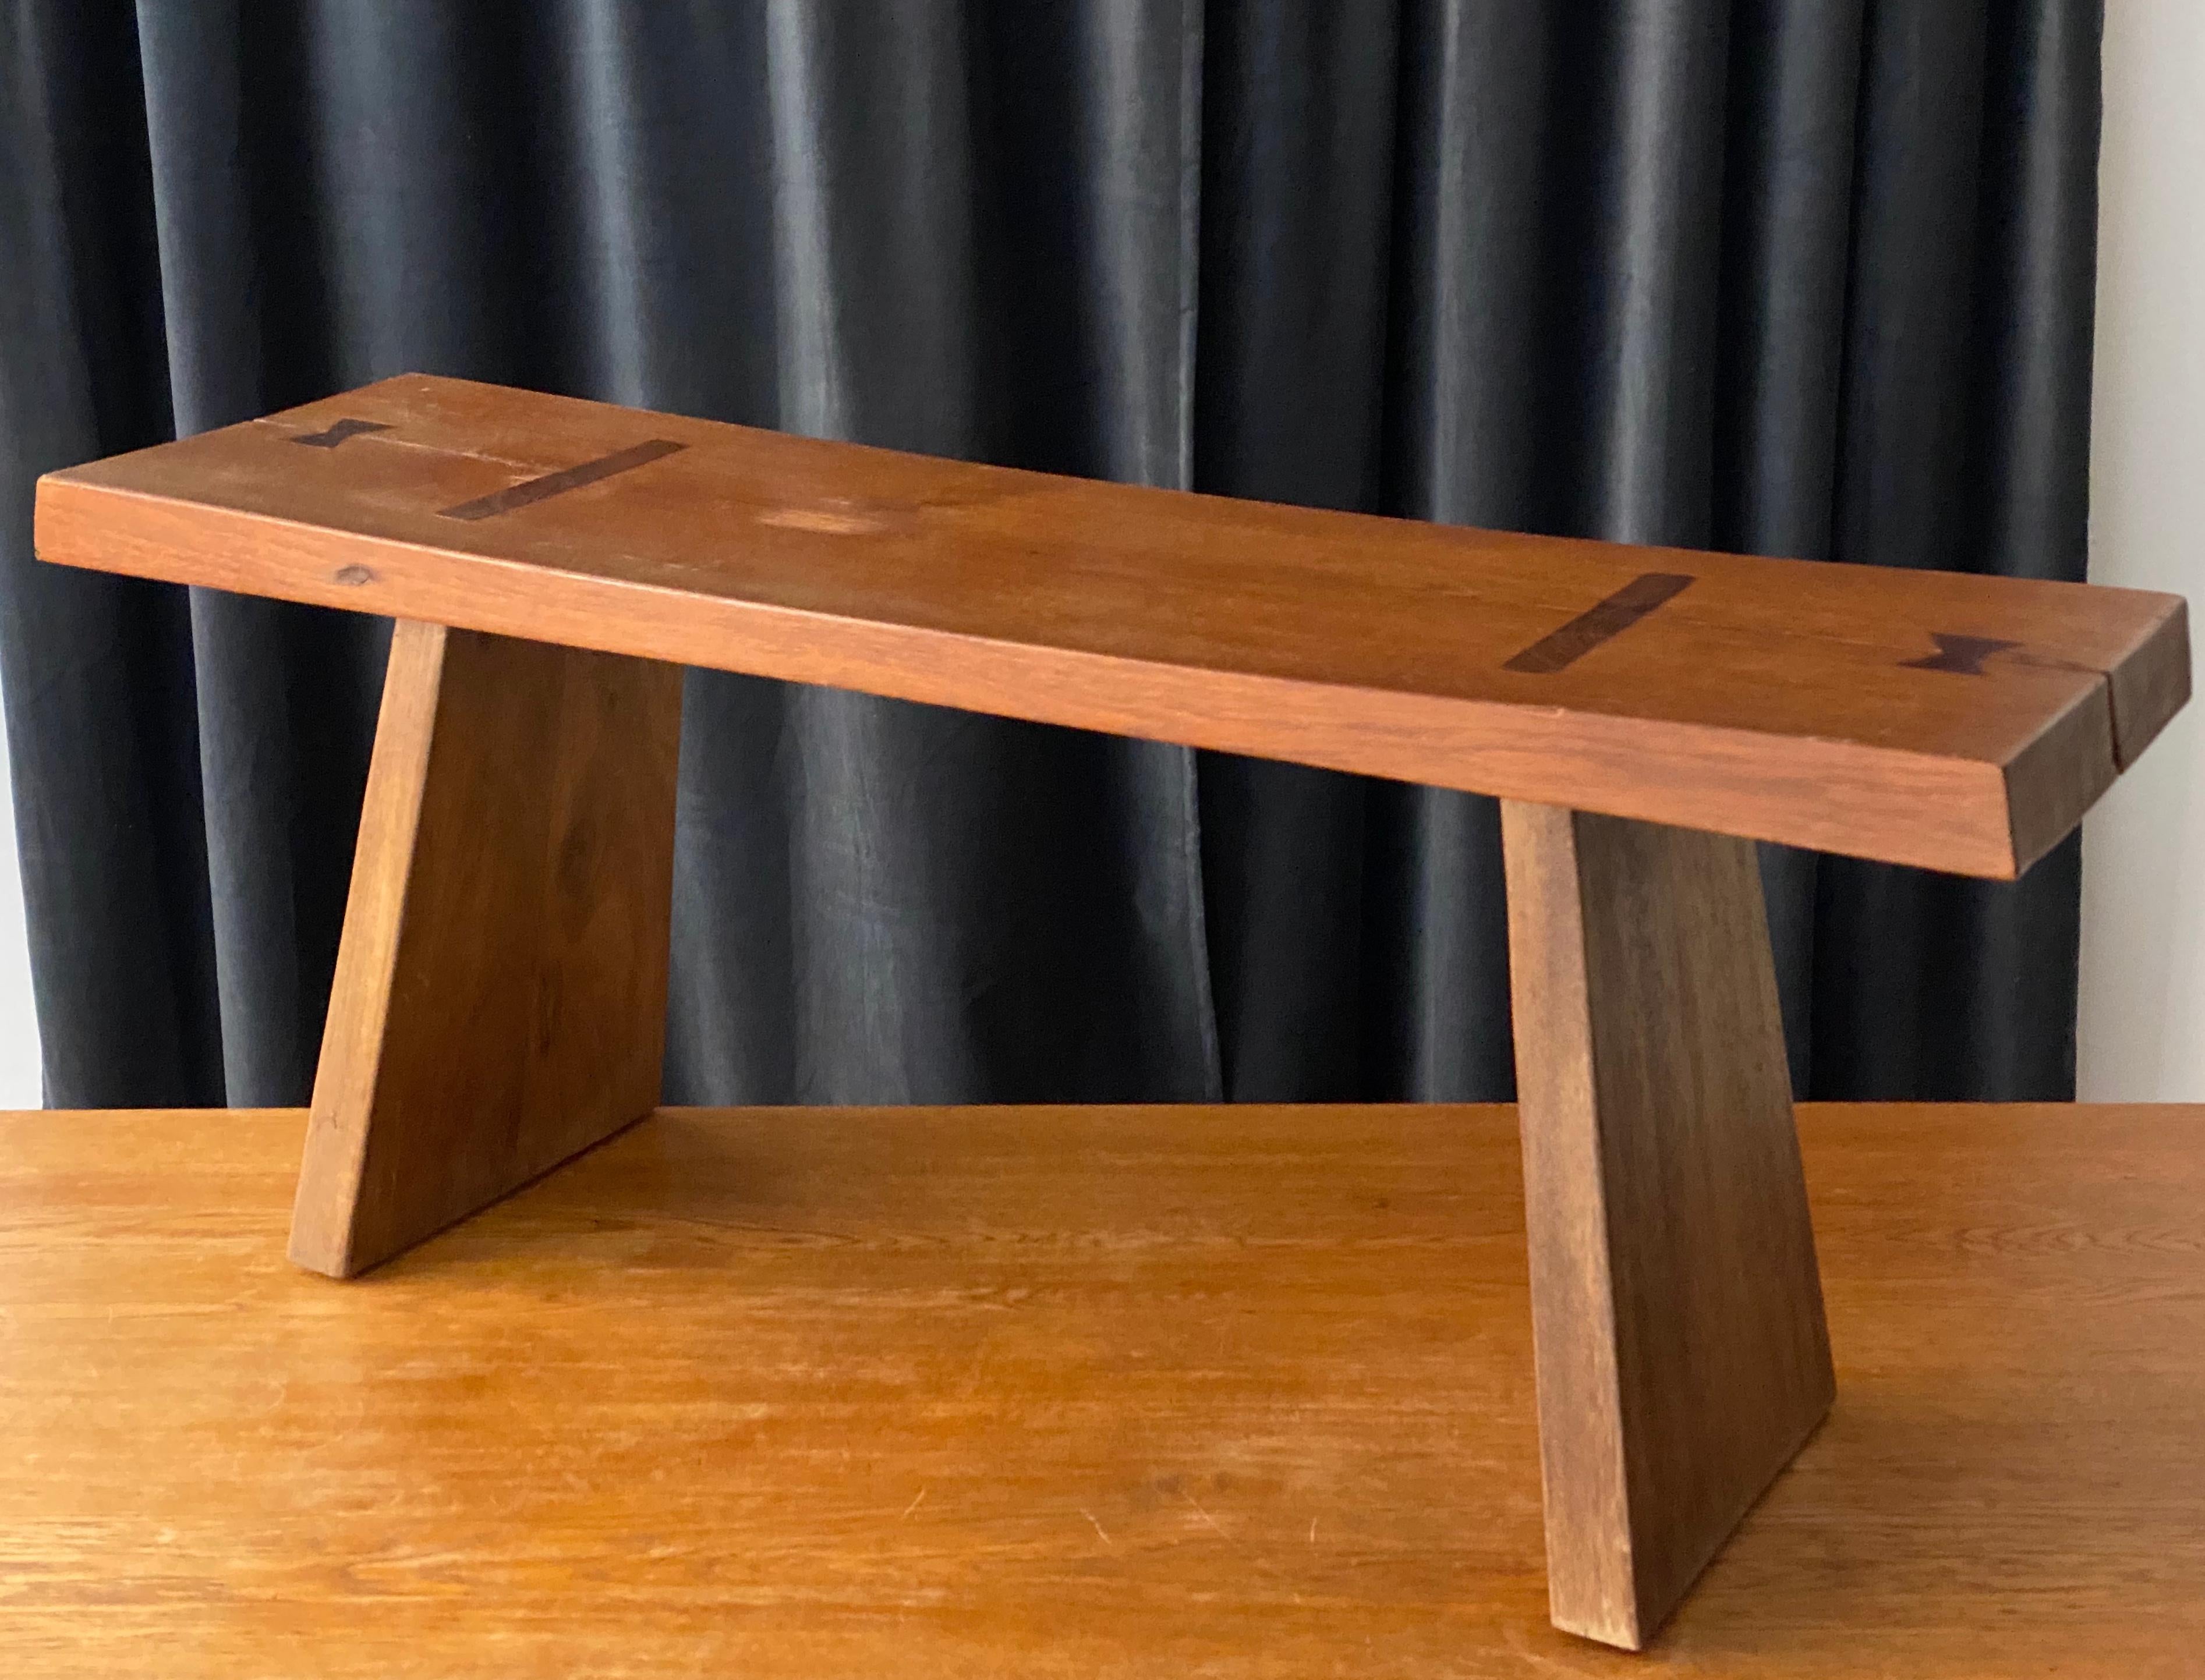 A sculptural Minimalist bench. In sold stained oak. Features beautifully revealed joinery, and dovetail keys, similar to the butterfly joints used by George Nakashima.

Other designers of the period include Roland Wilhelmsson, Pierre Chapo, and